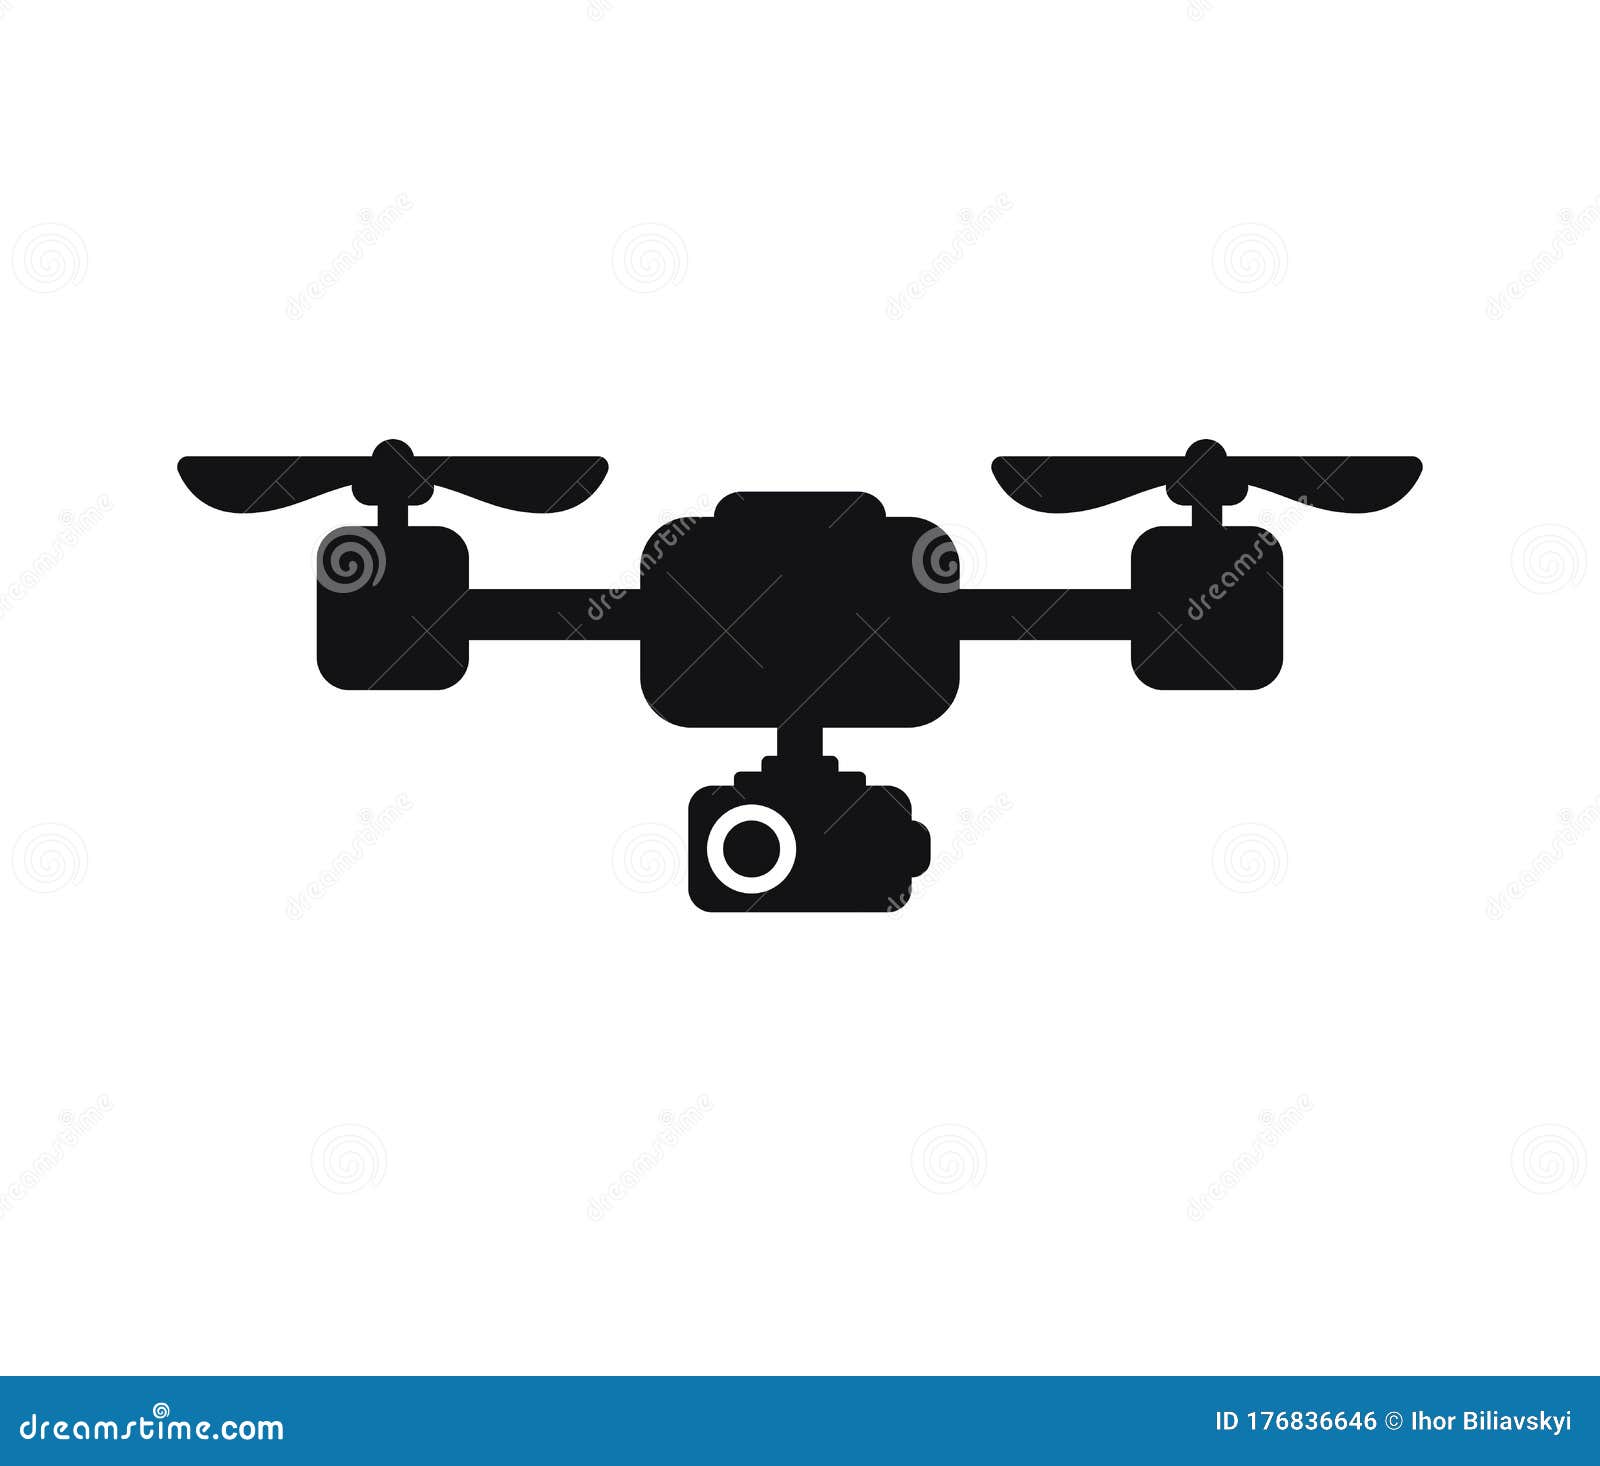 Cute Cartoon Drone with Camera for Photographing and Recording Video Isolated on White Background. Aerial Quadcopter Concept with Vector Illustration of camera, photographing: 176836646